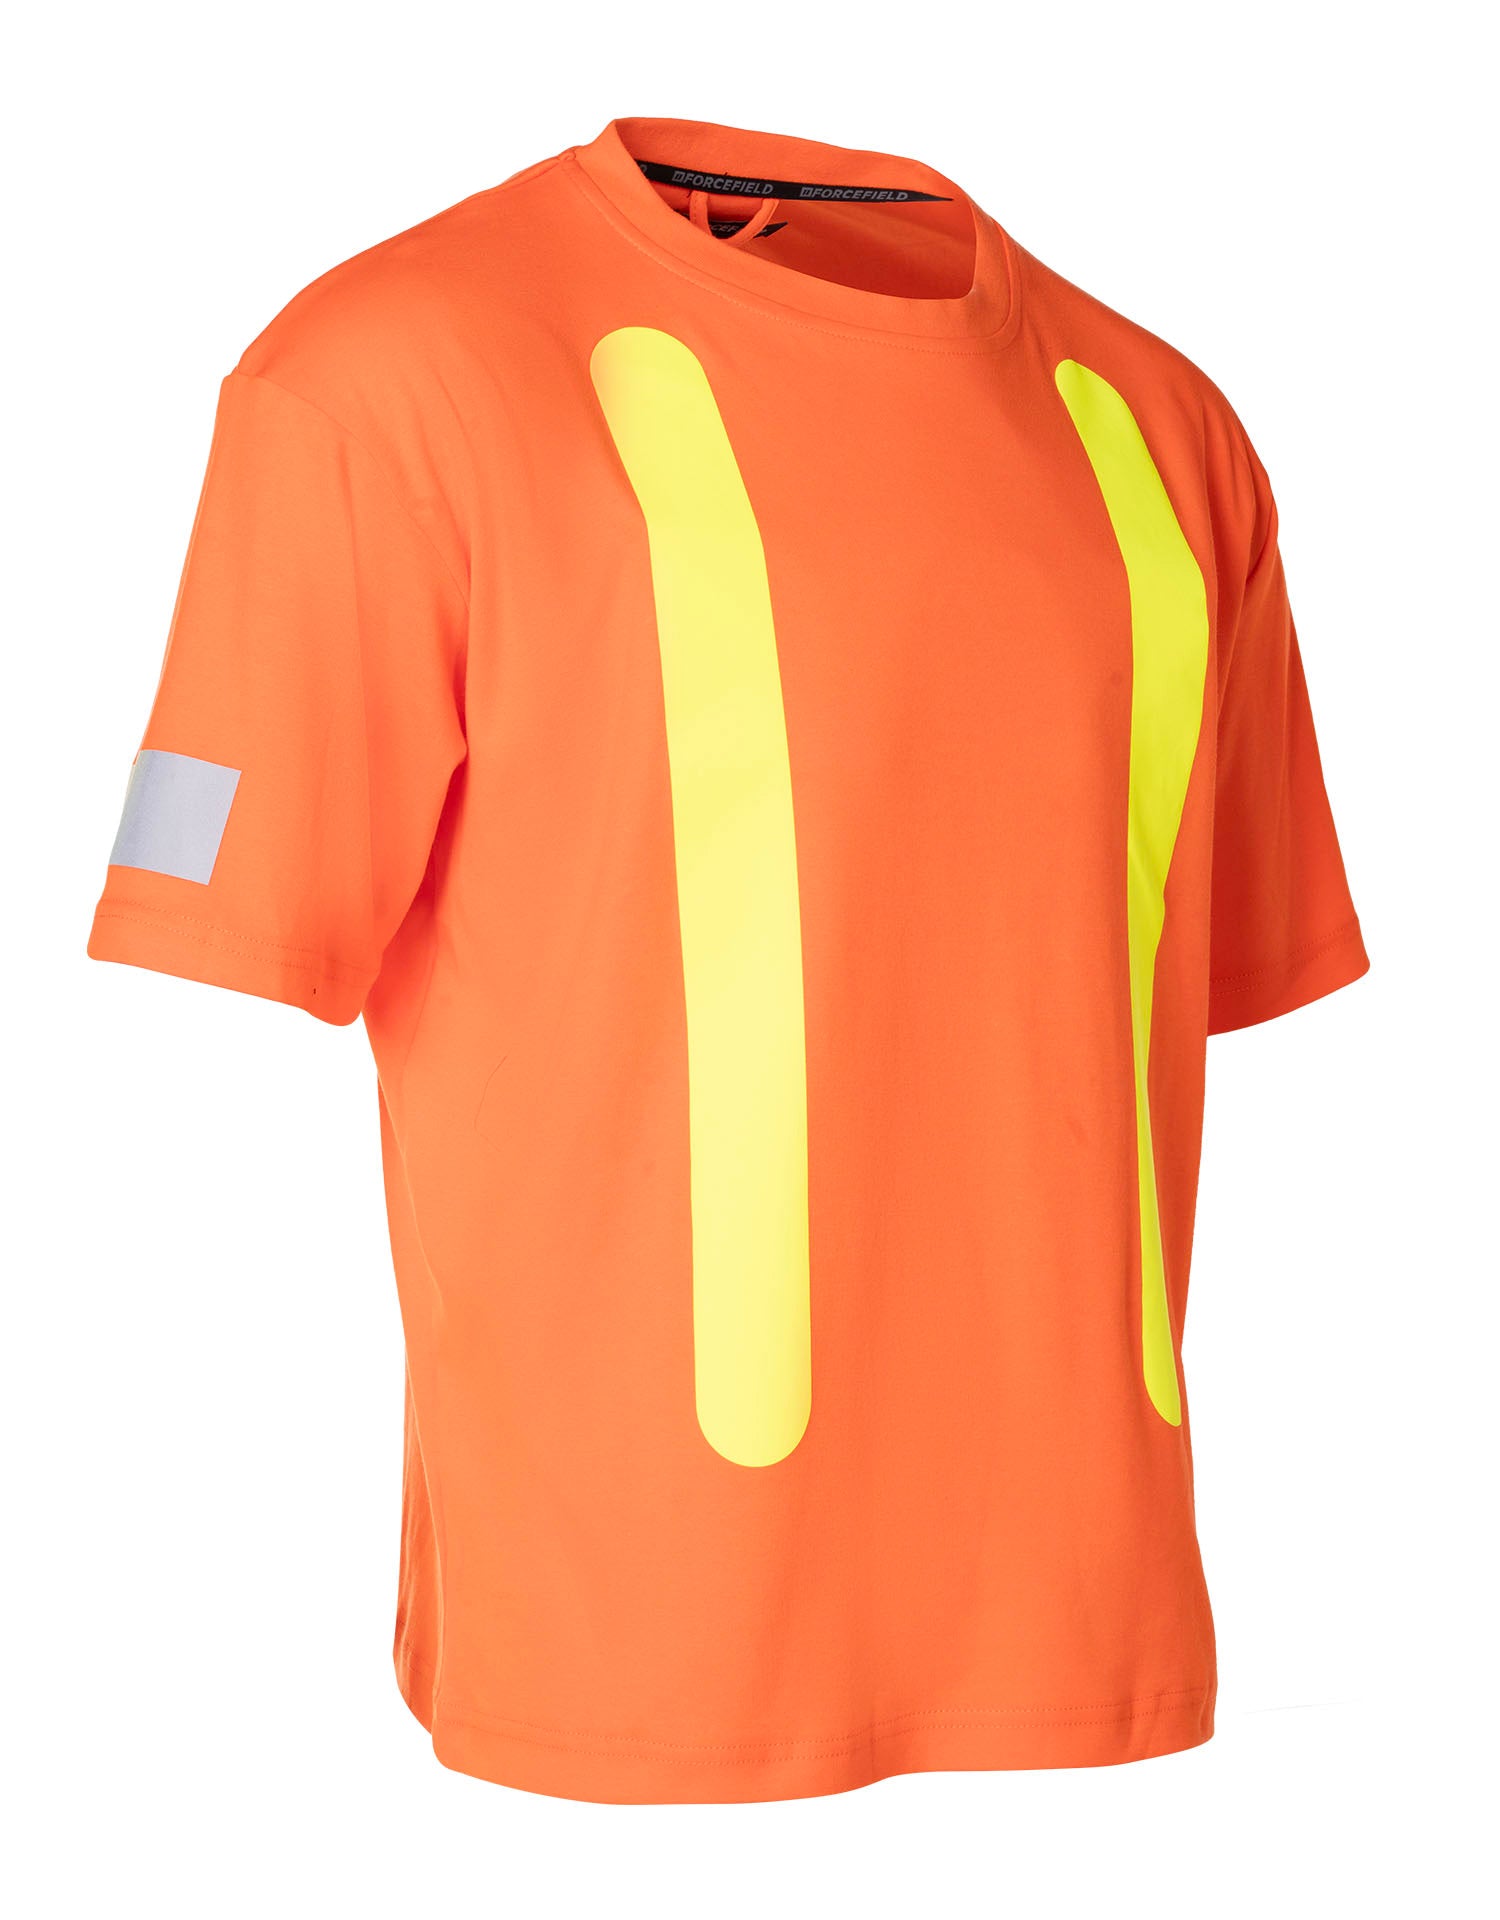 Retro Safety Cotton Short Sleeve Tee With Reflective Arm Striping